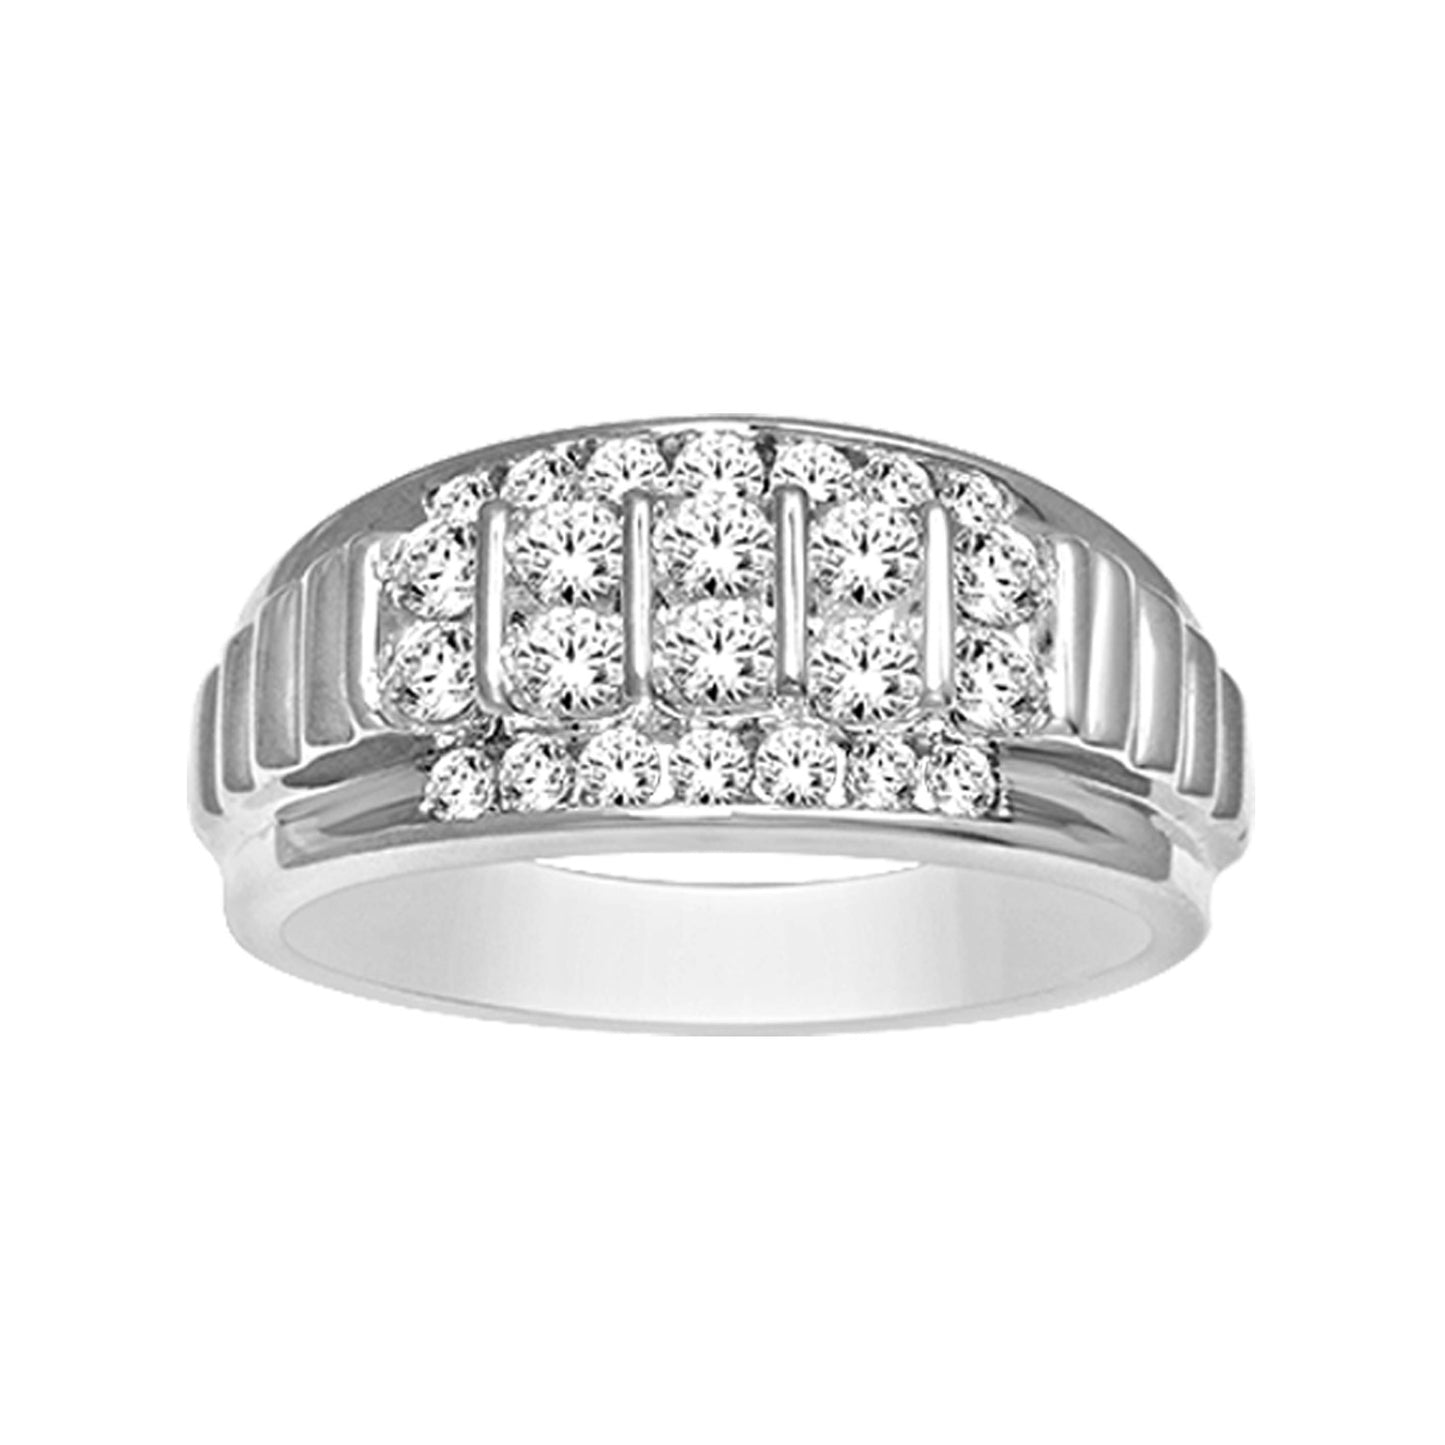 Men's Fashion Diamond Band - 1.00 Carats in 10KT White Gold